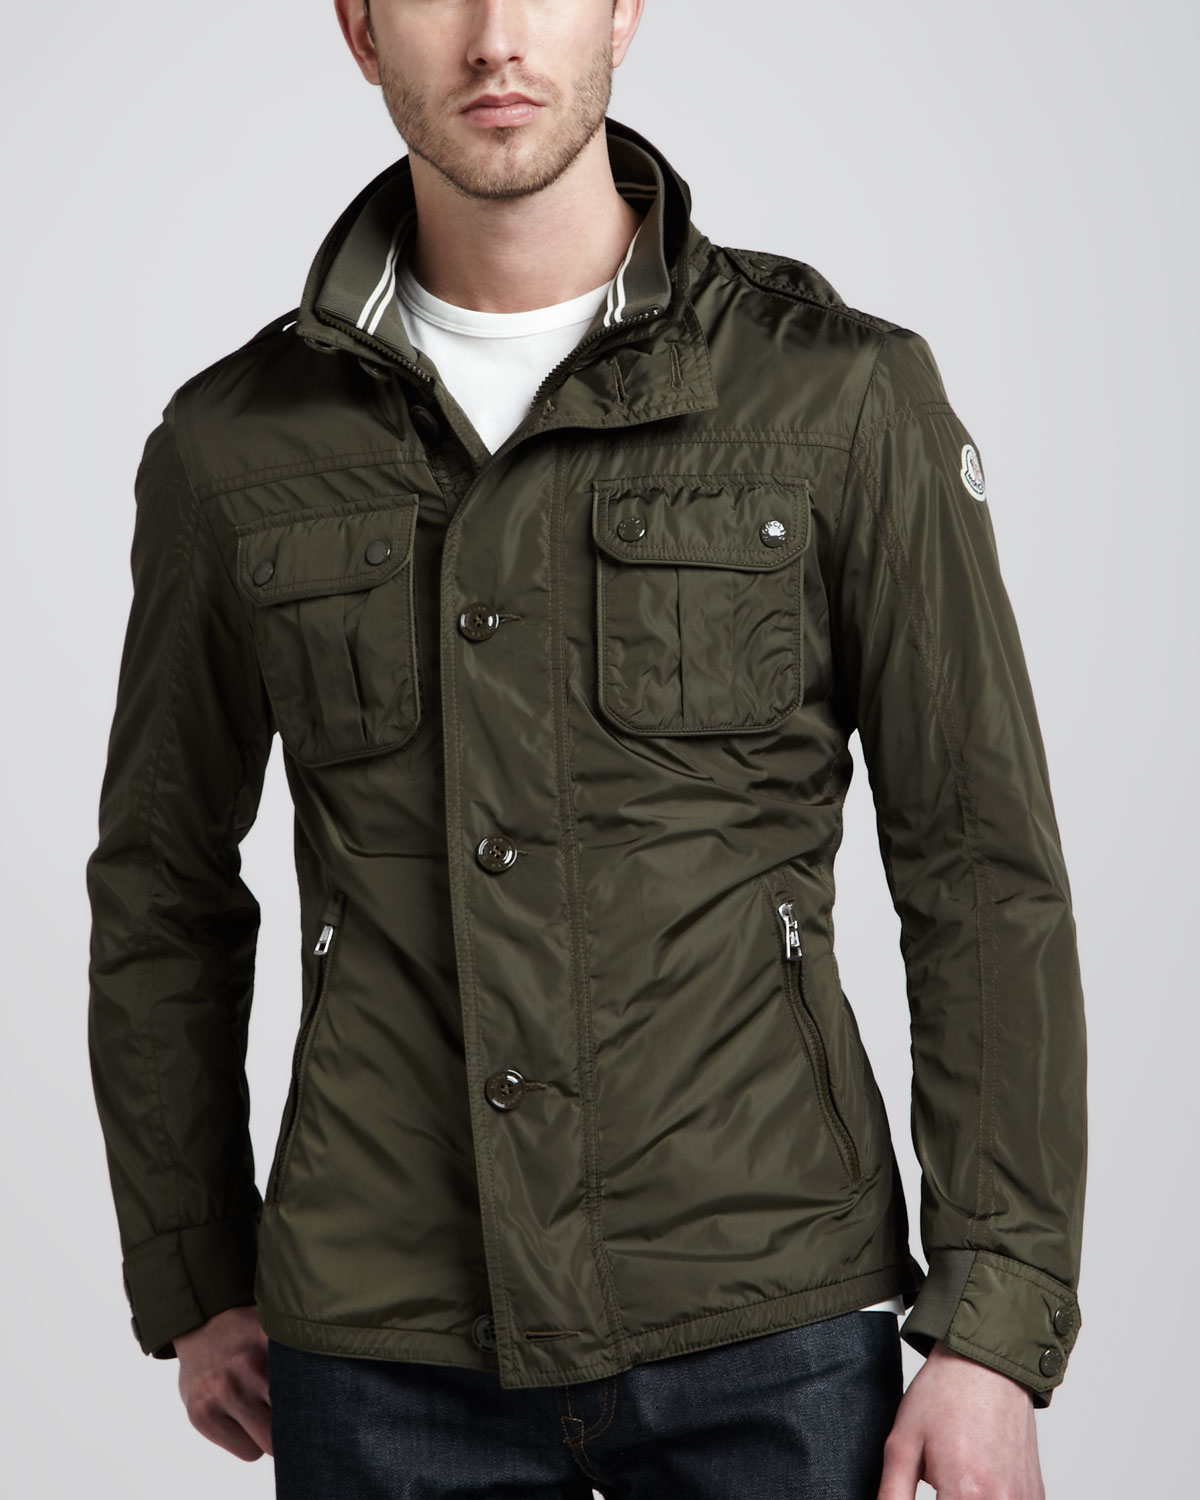 Moncler Military Field Jacket in Green for Men - Lyst